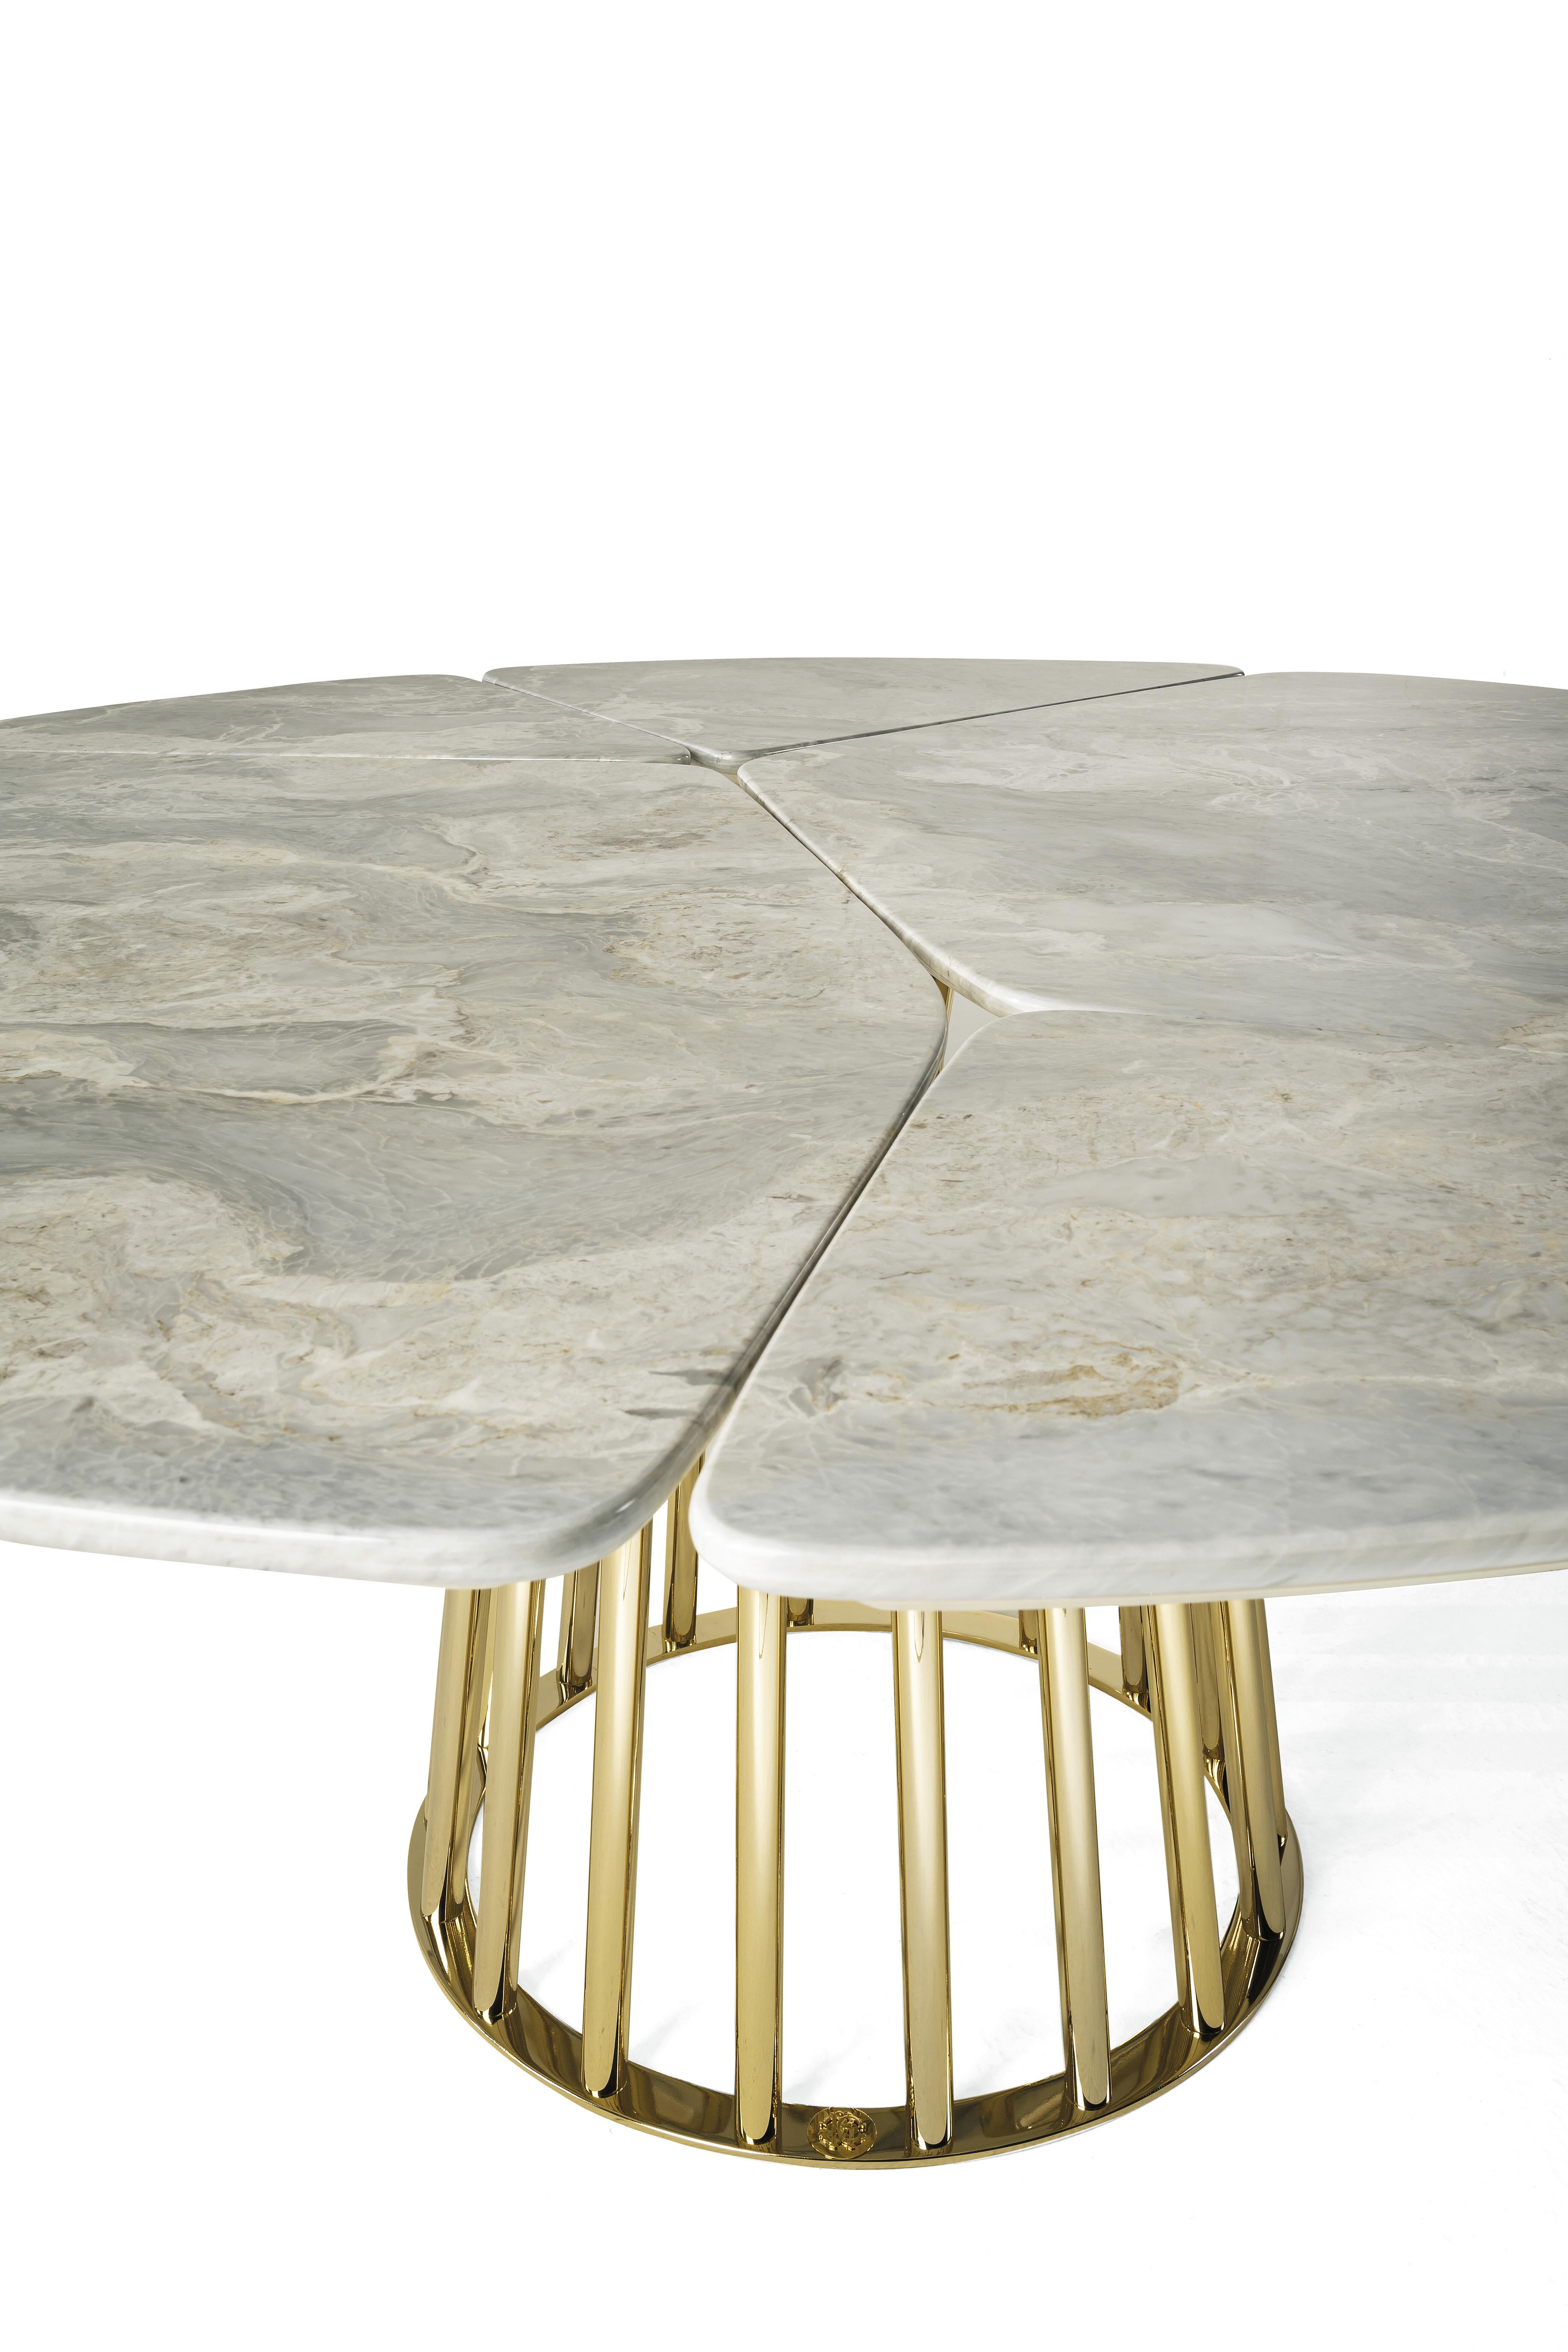 Modern 21st Century Baobab Table with Marble Top by Roberto Cavalli Home Interiors For Sale